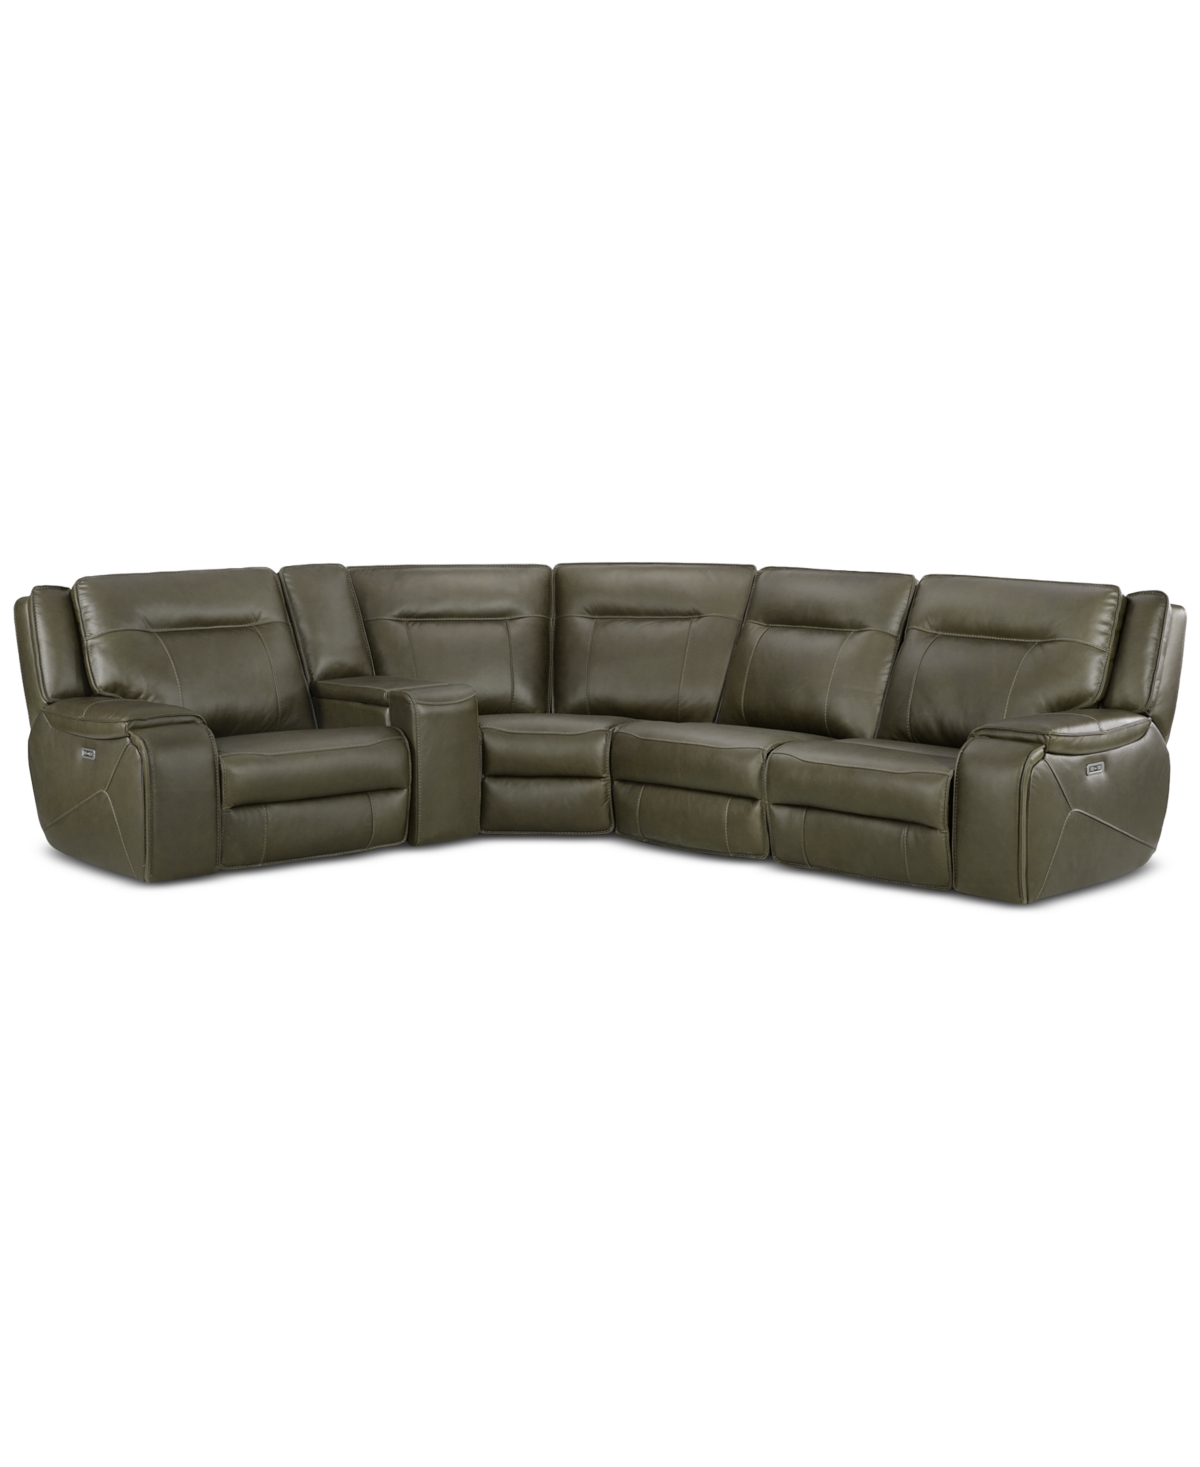 Macy's Hansley 5-pc. Zero Gravity Leather Sectional With 3 Power Recliners, Created For  In Grey